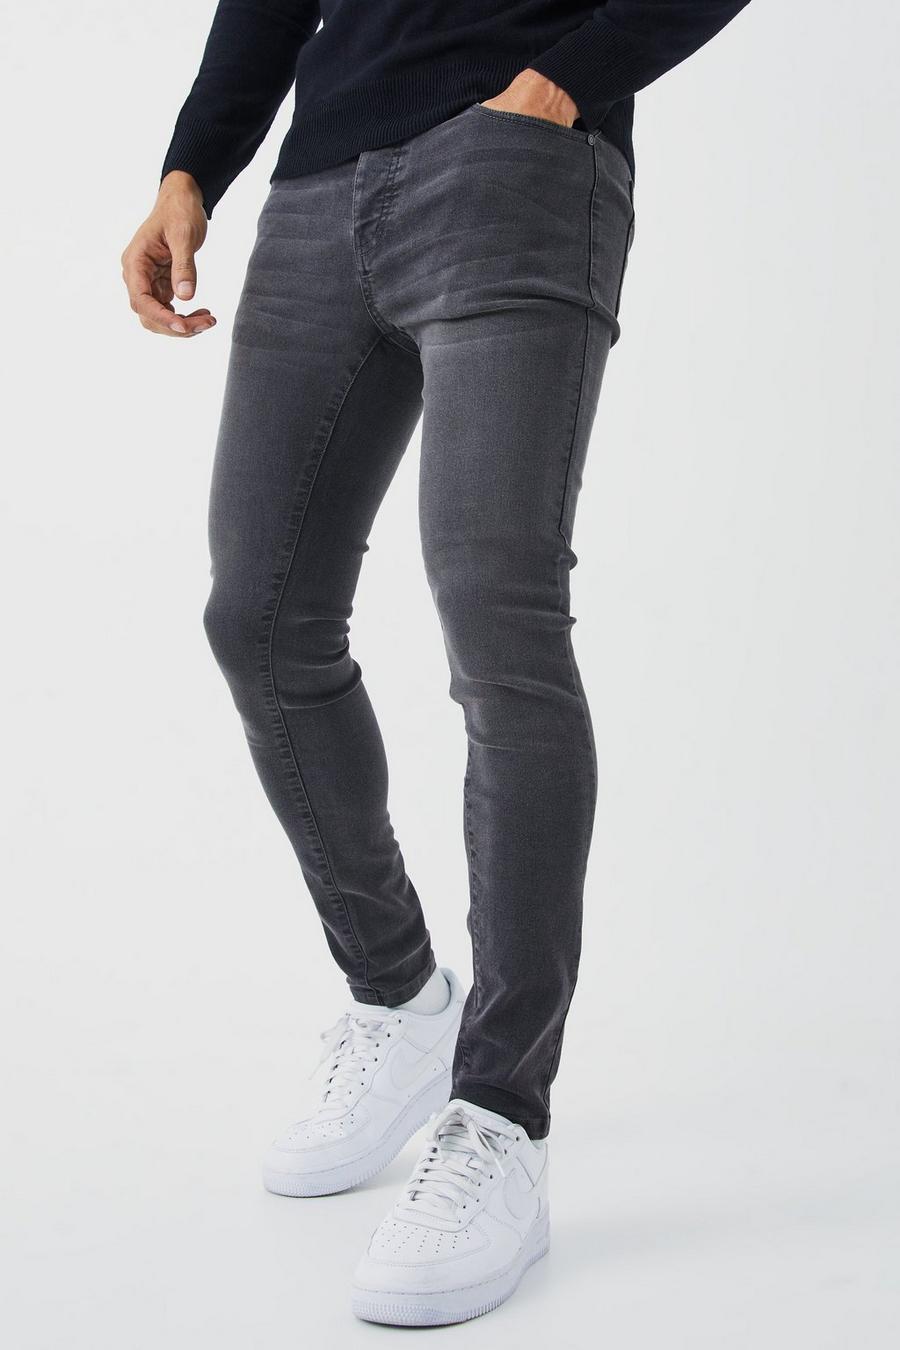 Super Skinny Stretch Jeans, Charcoal gris